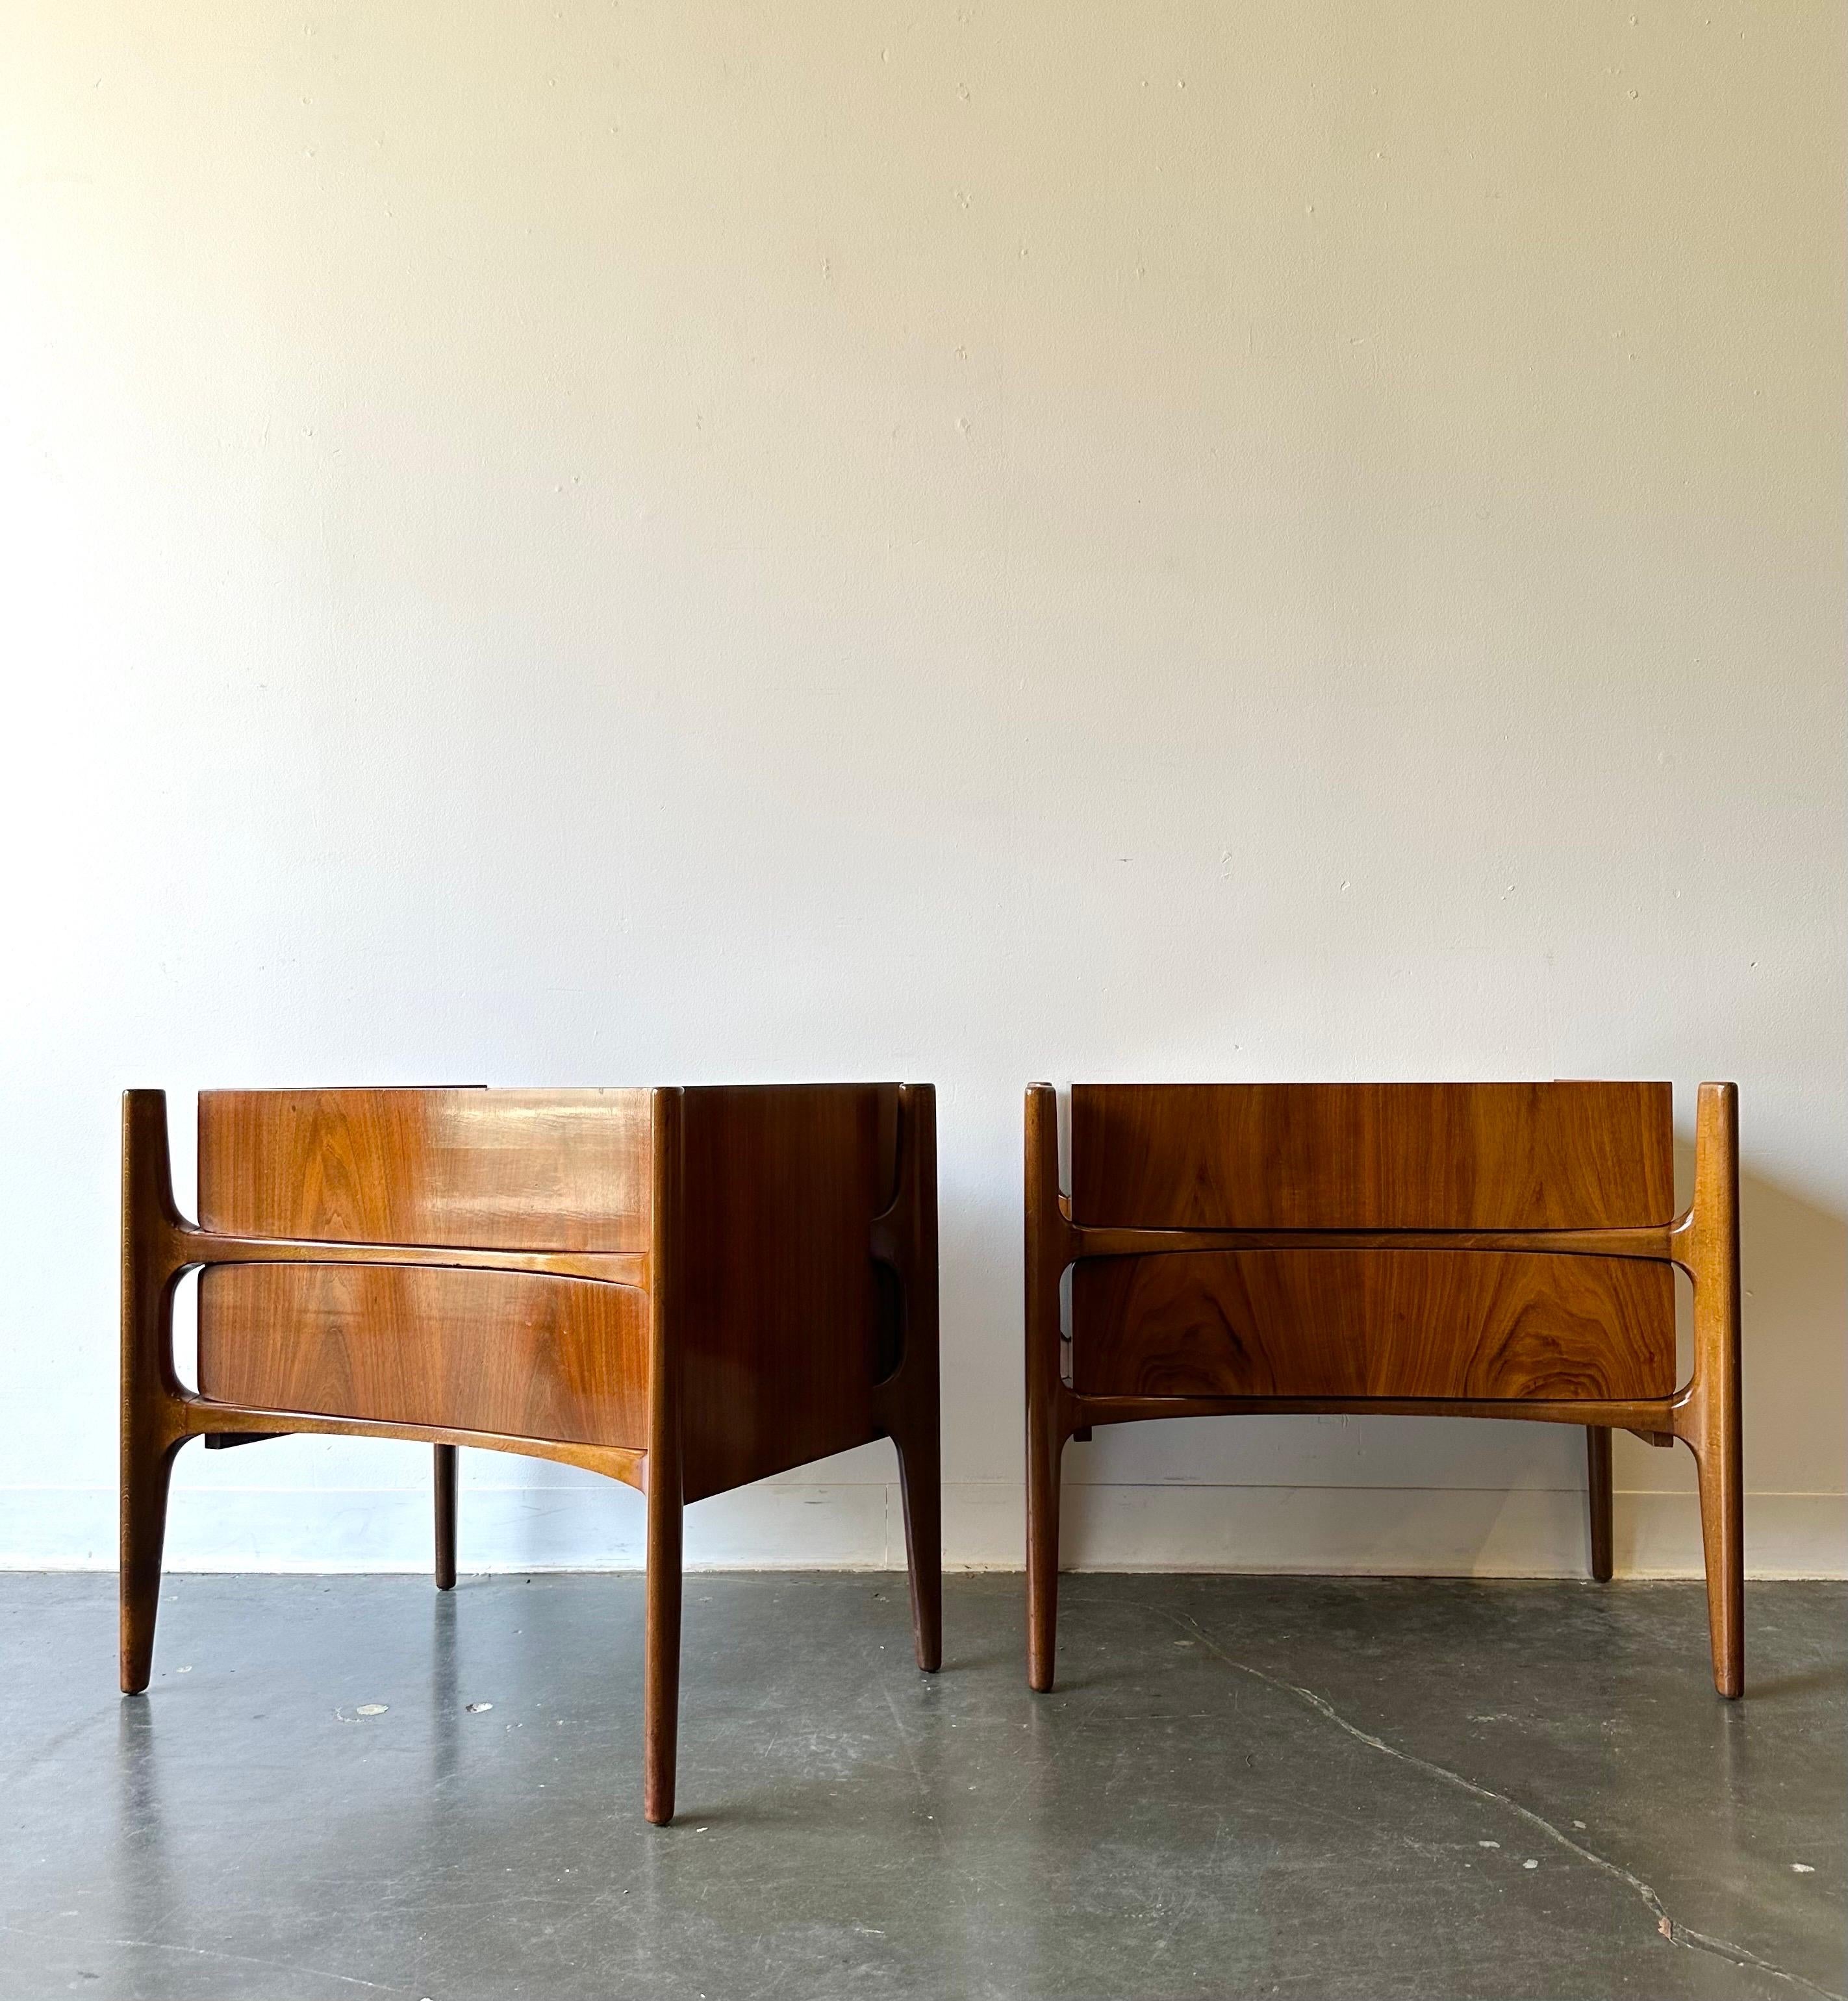 Highly sought after Exoskeleton nightstands by Designer William Hinn circa 1960.

Stunning set of walnut two drawer night tables. 
Curved front, exoskeleton frame, and beautiful grain.

Dimensions:

23